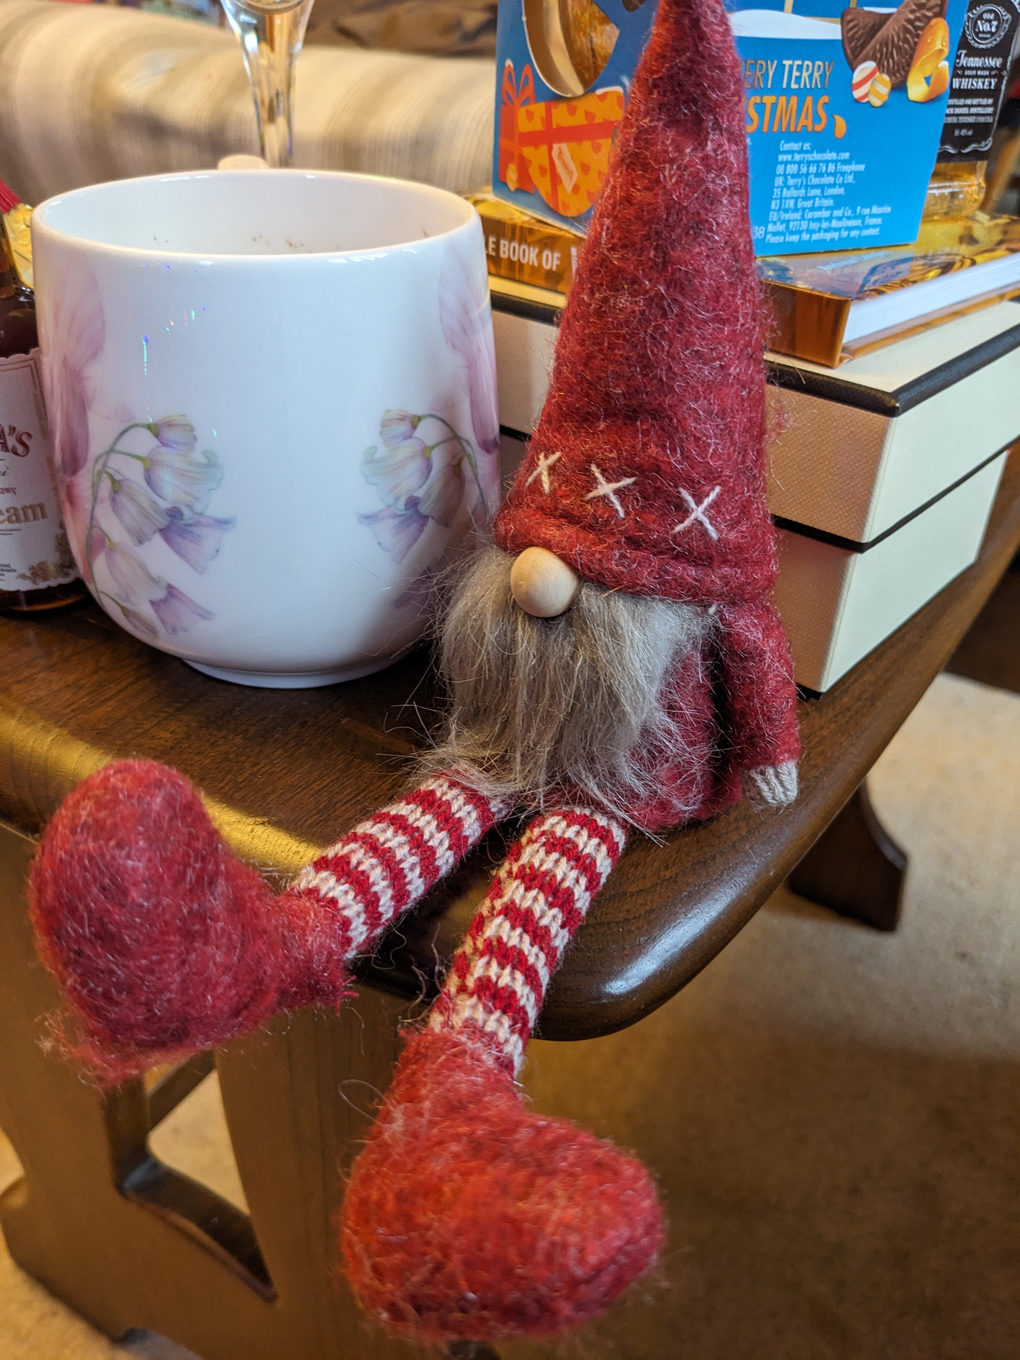 A felt bearded dwarf, dressed in red, sat on a table next to a mug